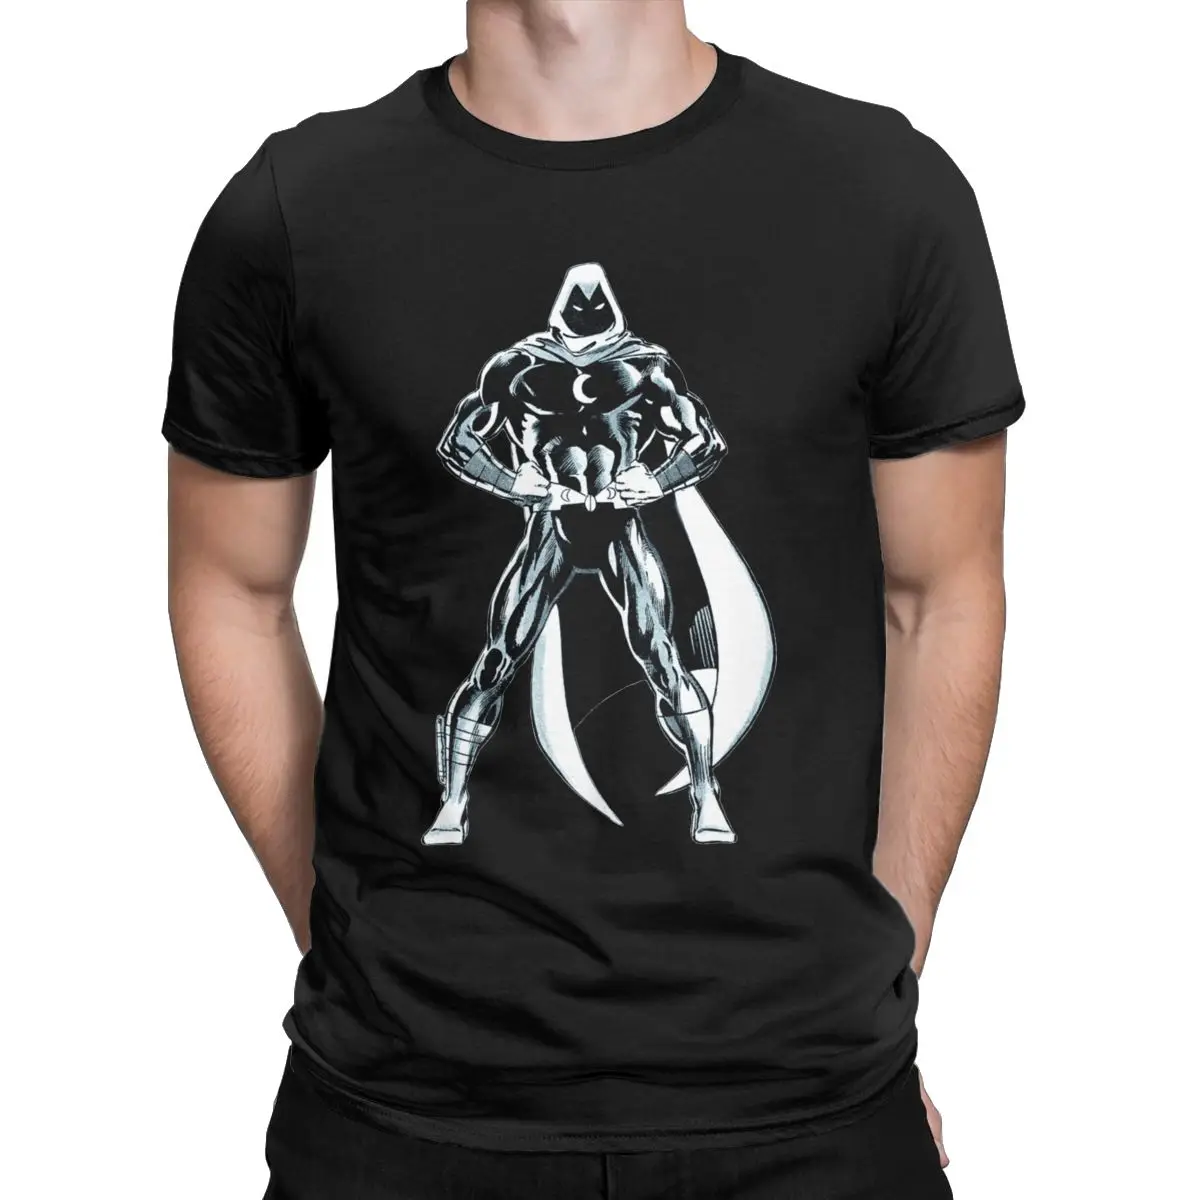 Funny Marvel Moon Knight Heroic Stand T-Shirts for Men O Neck Cotton T Shirts   Short Sleeve Tee Shirt Plus Size Tops